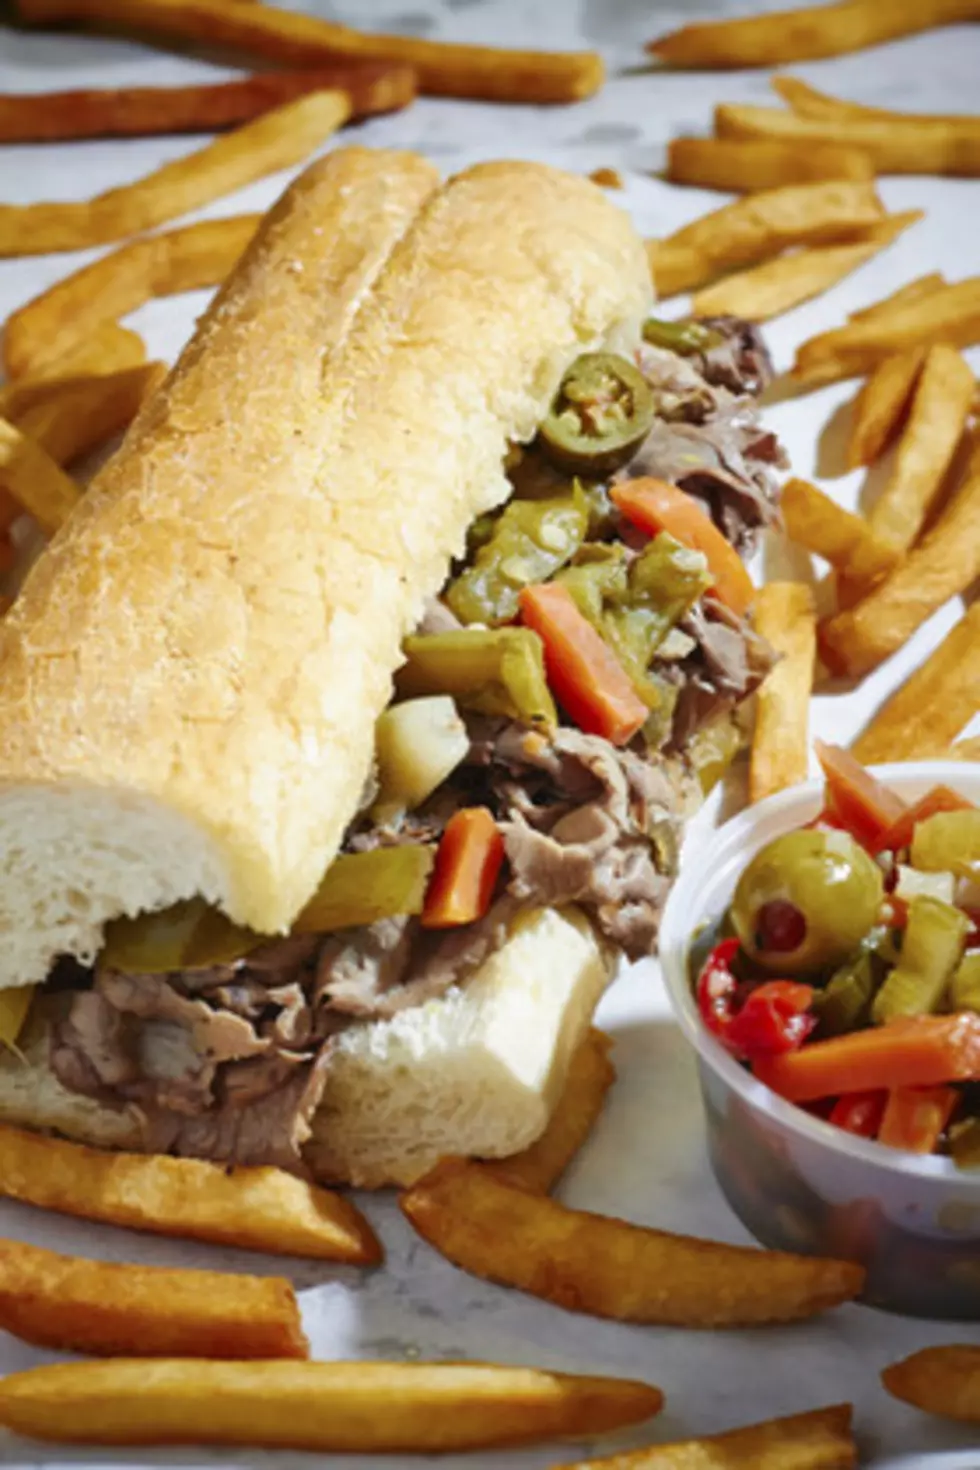 Skip The LIne For Beef Sandwiches